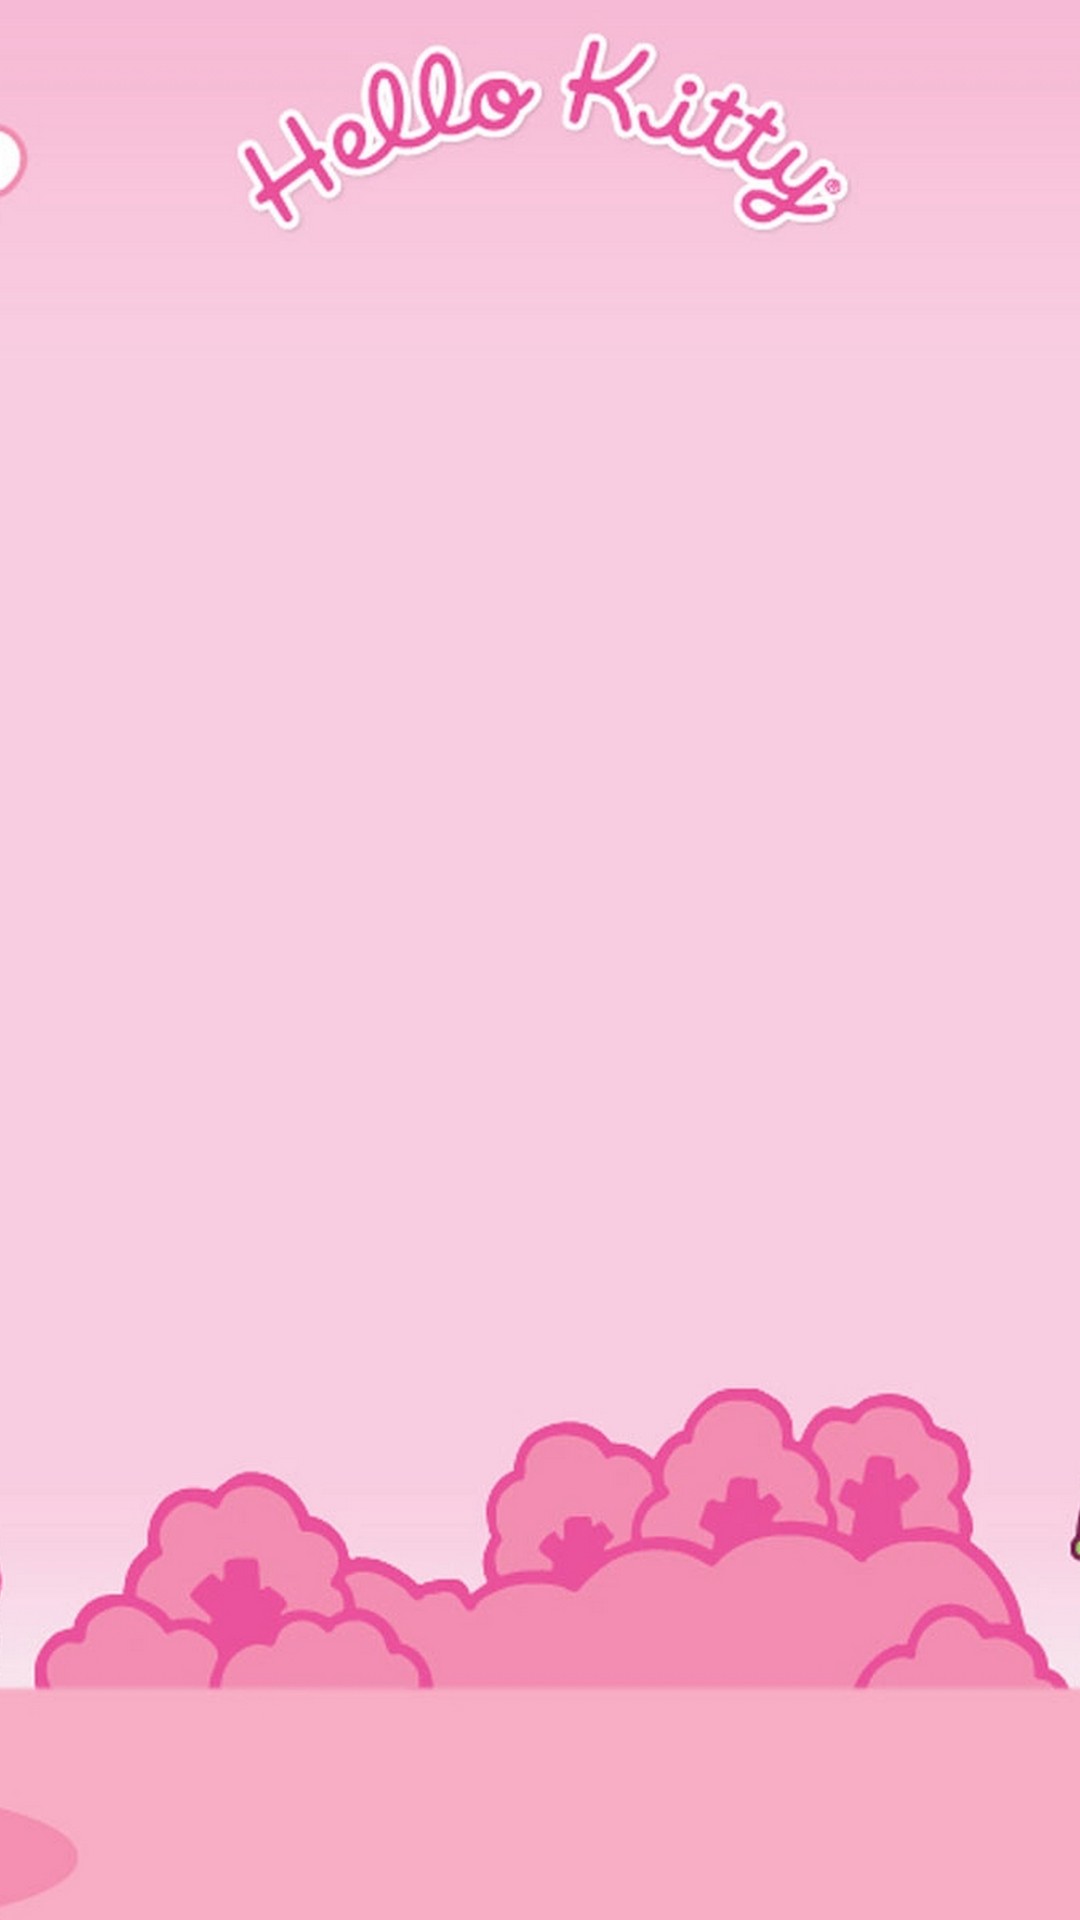 Wallpaper Android Hello Kitty Pictures with image resolution 1080x1920 pixel. You can make this wallpaper for your Android backgrounds, Tablet, Smartphones Screensavers and Mobile Phone Lock Screen